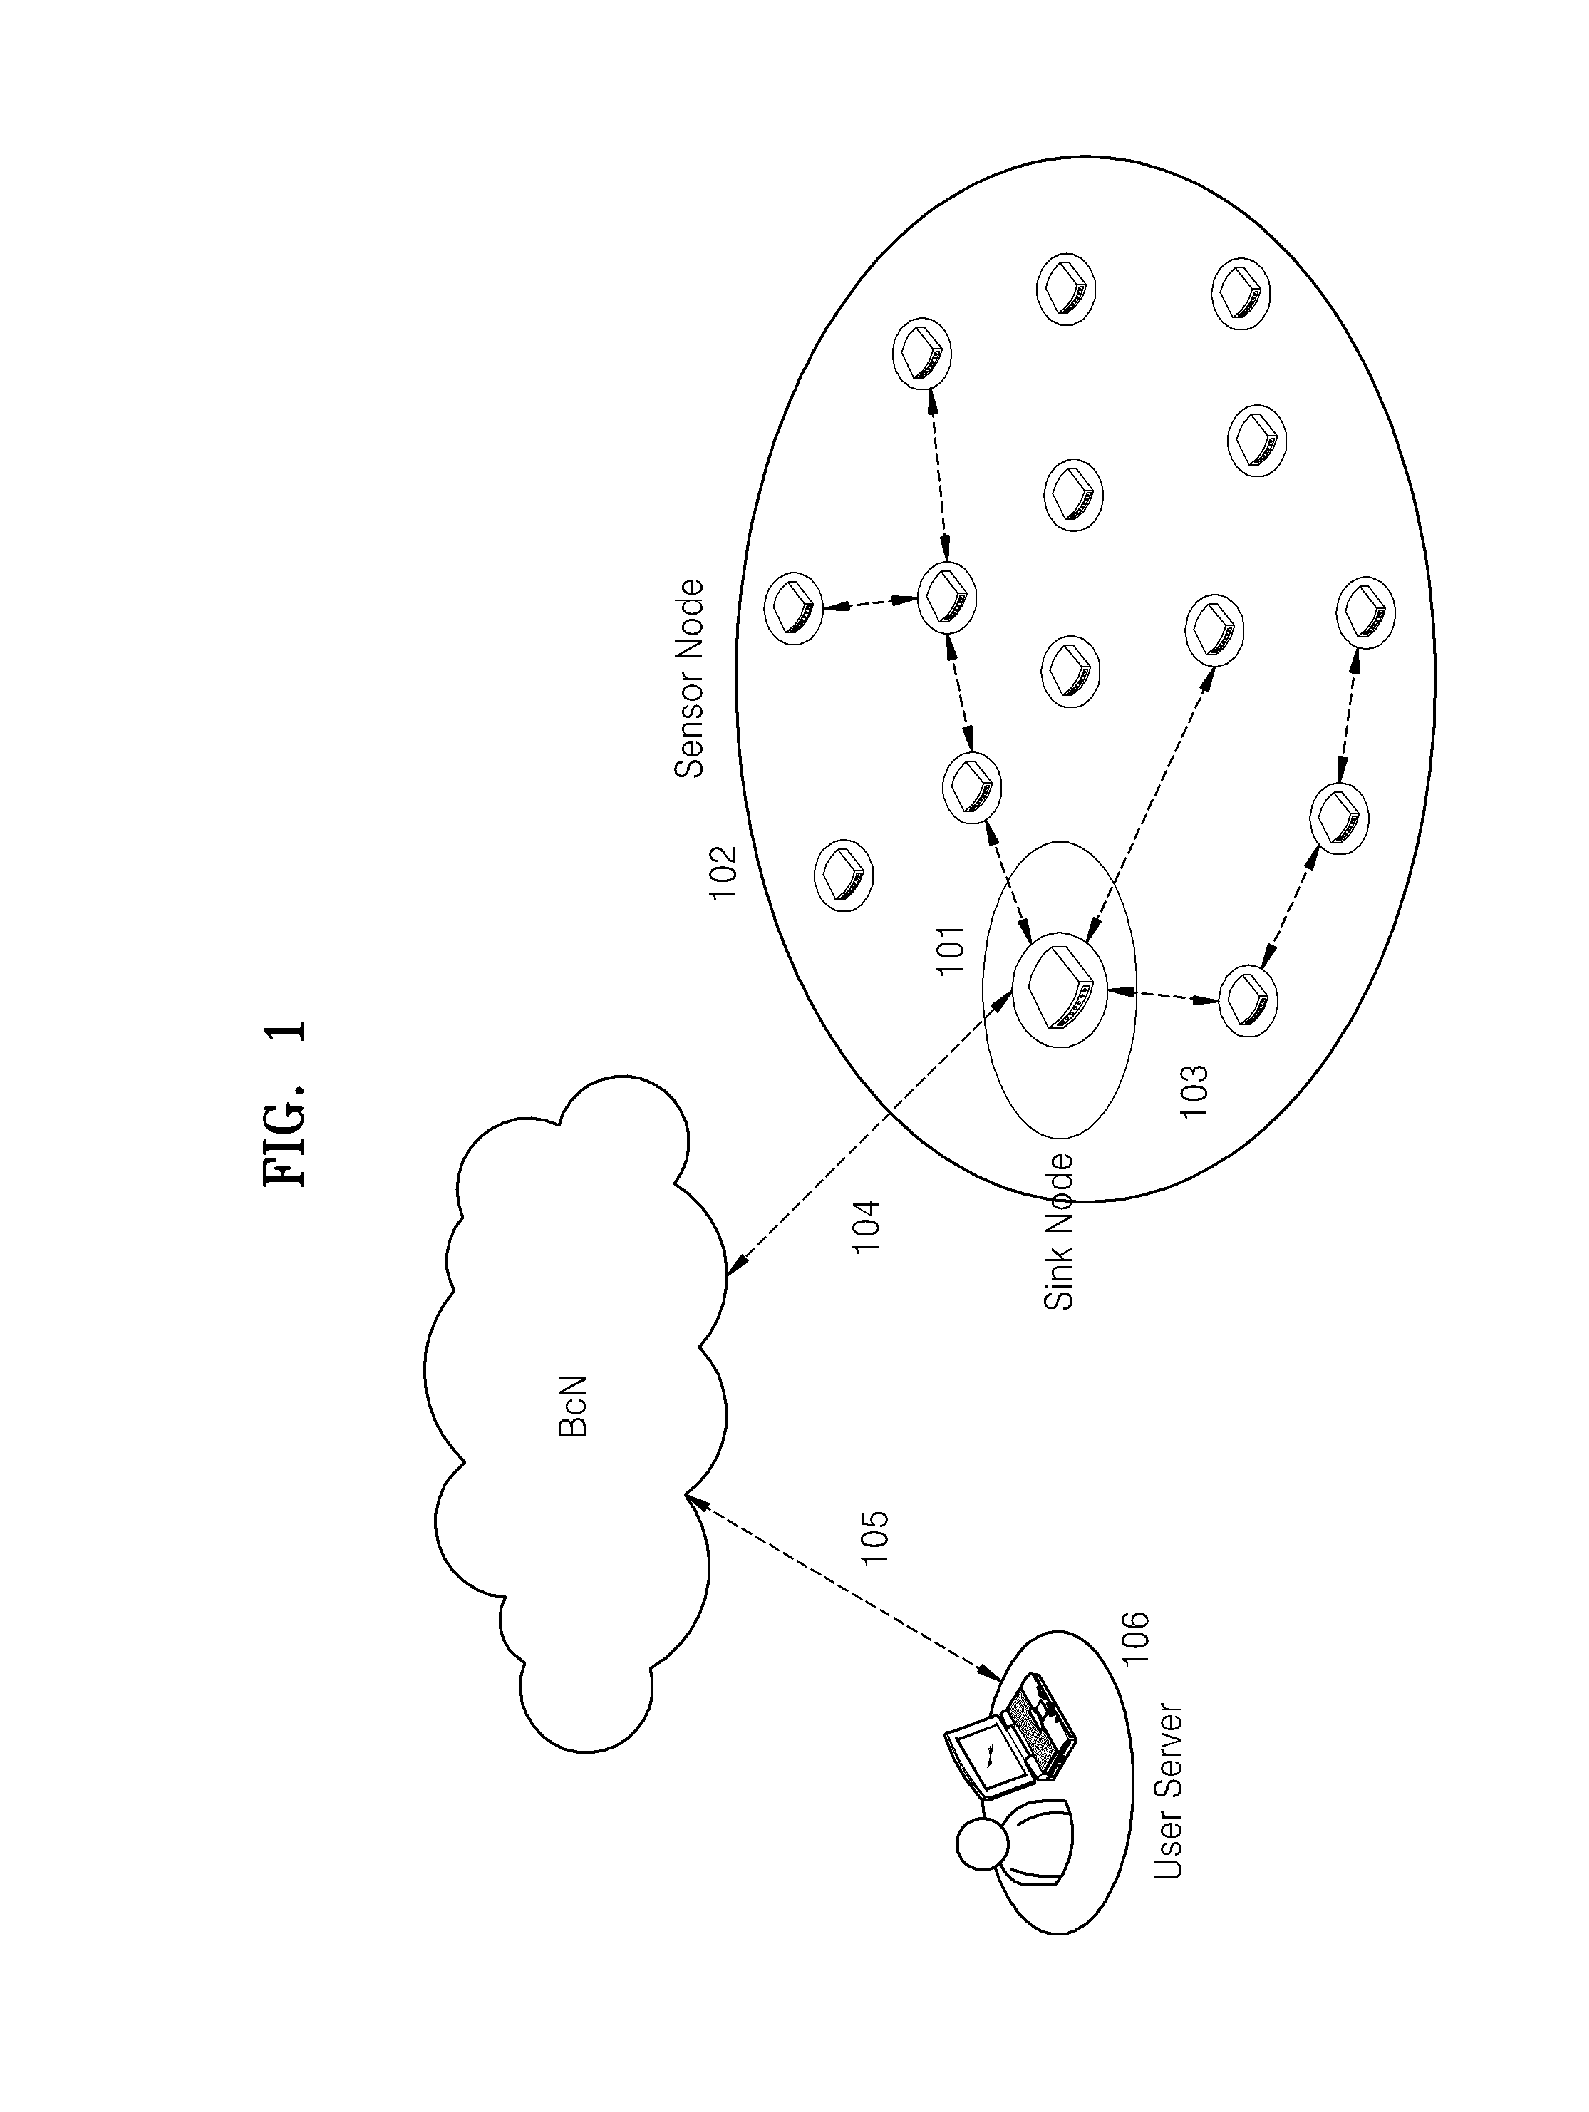 Wake-up apparatus and wake-up method for low power sensor node